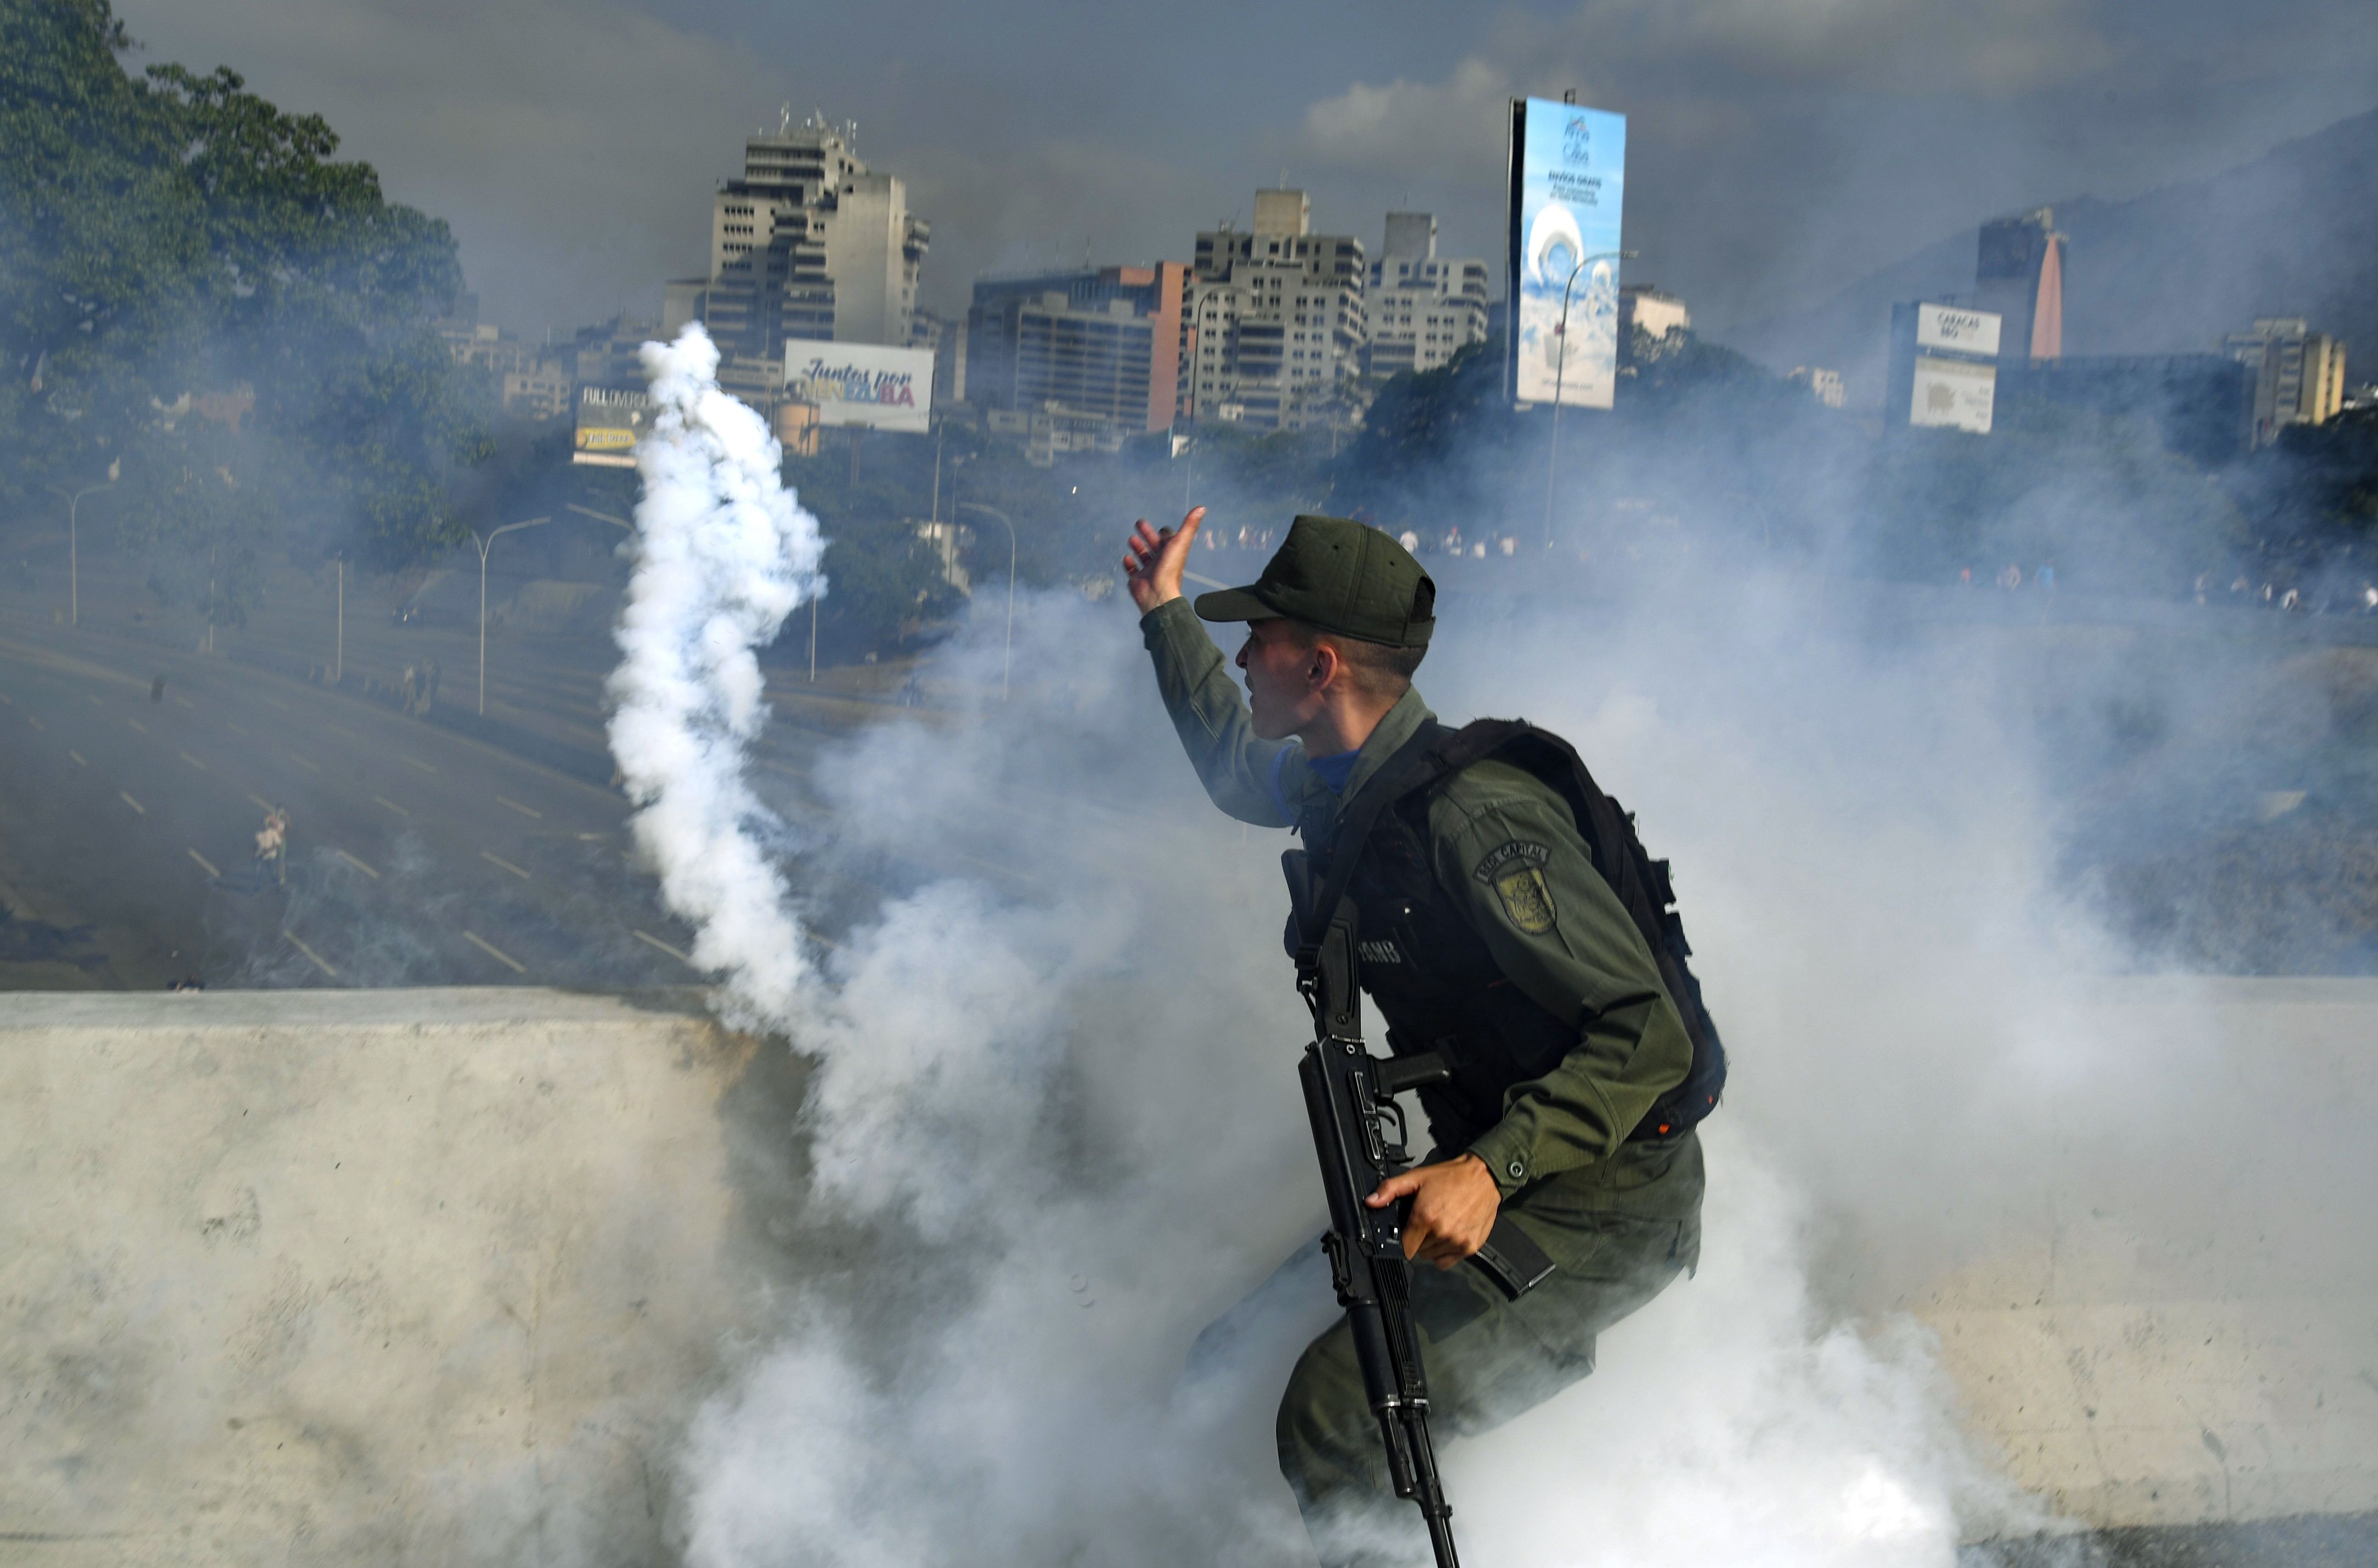 A member of the Bolivarian National Guard supporting Venezuelan opposition leader Juan Guaido throws a tear gas canister.